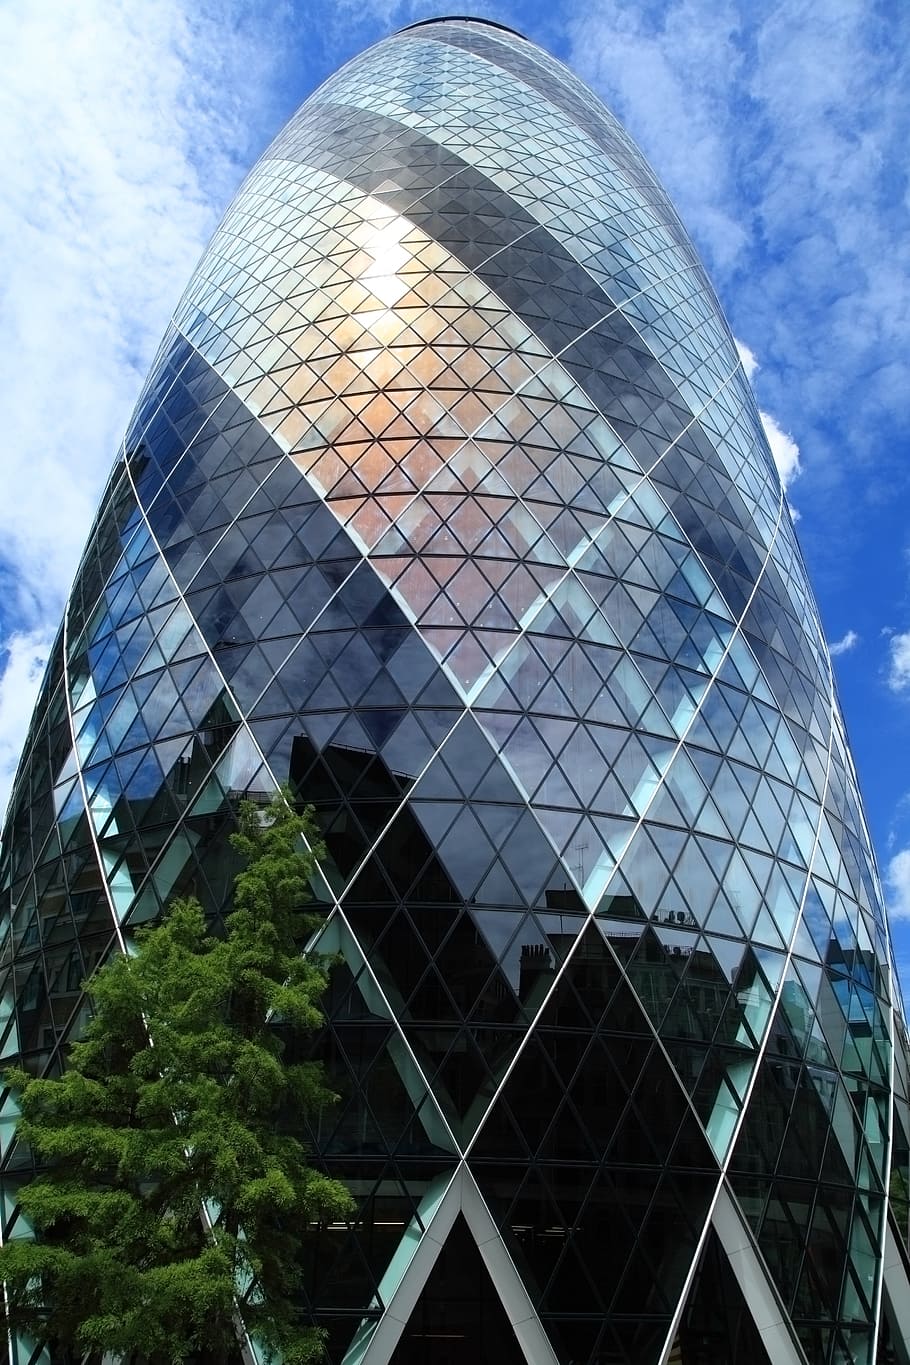 worm, eye view, building, the gherkin, london, architecture, 30 st mary axe, great britain, business, city